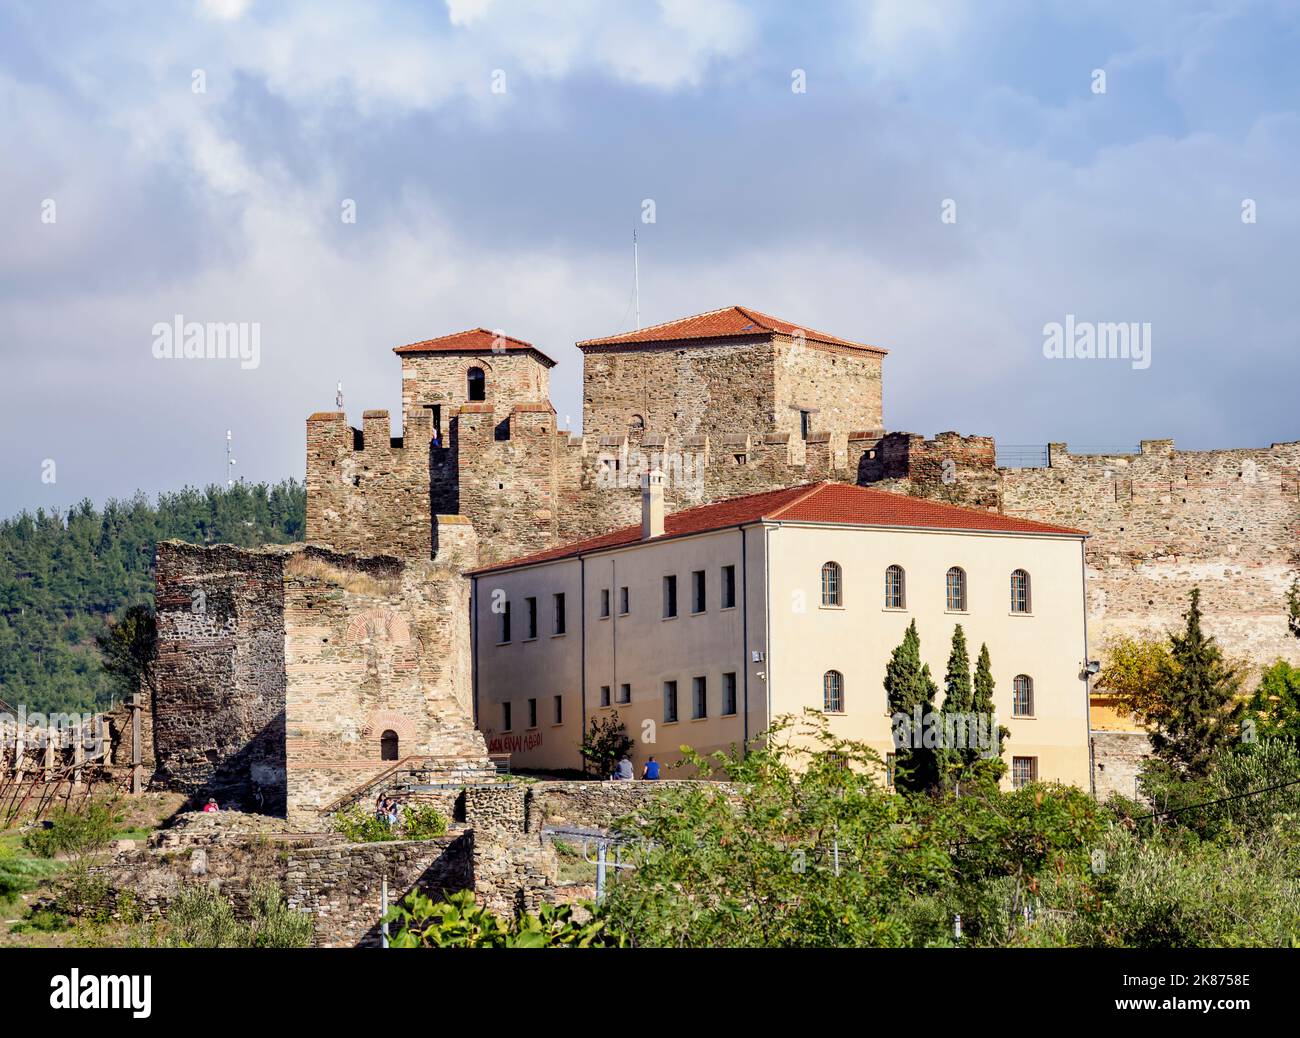 Heptapyrgion of Thessalonica, Seven Towers Citadel, UNESCO World Heritage Site, Thessaloniki, Central Macedonia, Greece, Europe Stock Photo